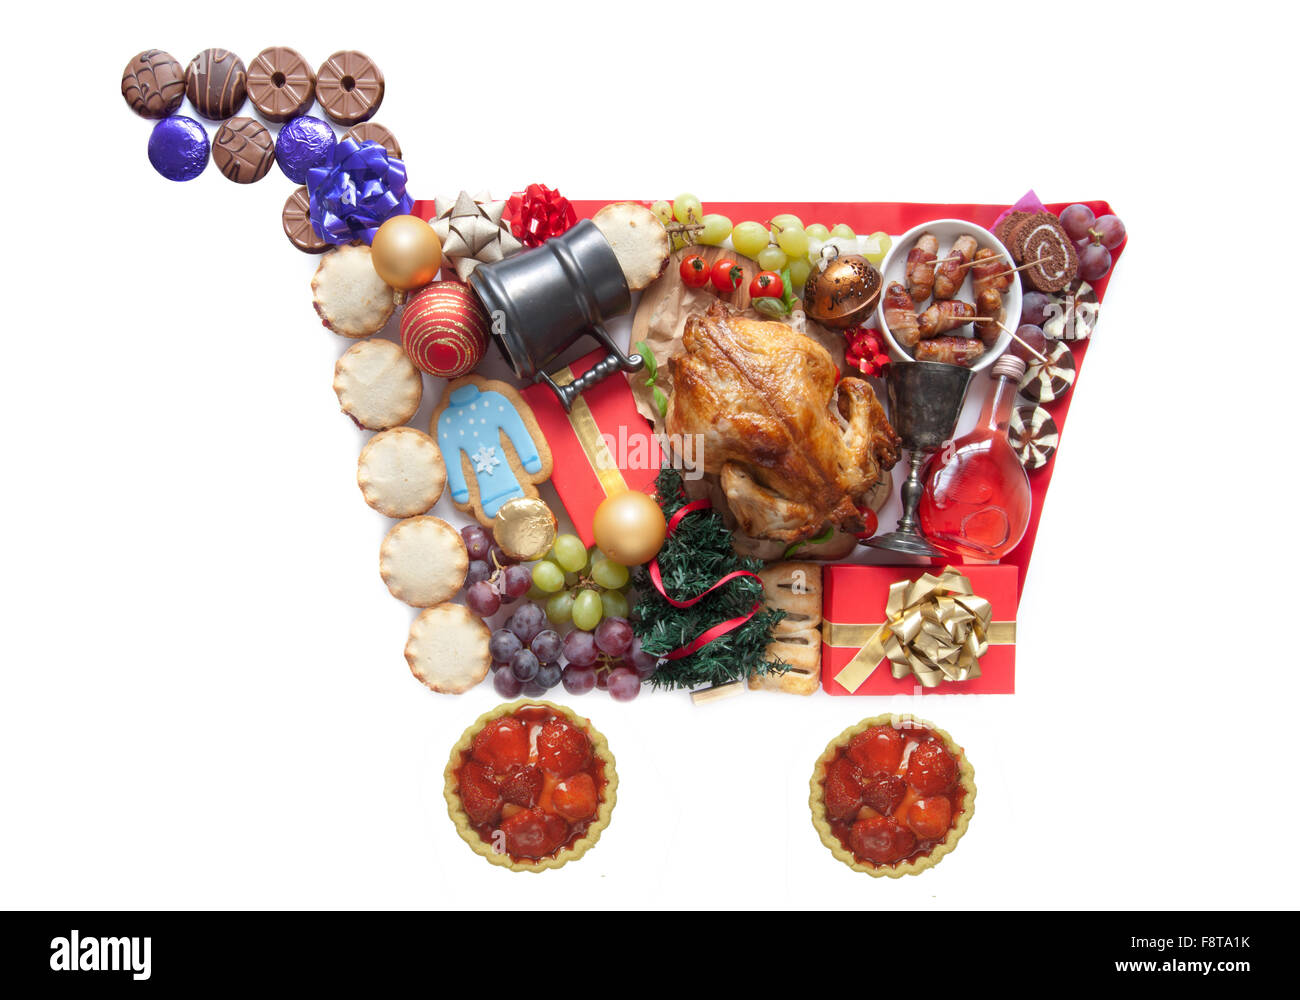 Christmas foods, drinks and presents in the shape of a shopping cart symbol Stock Photo